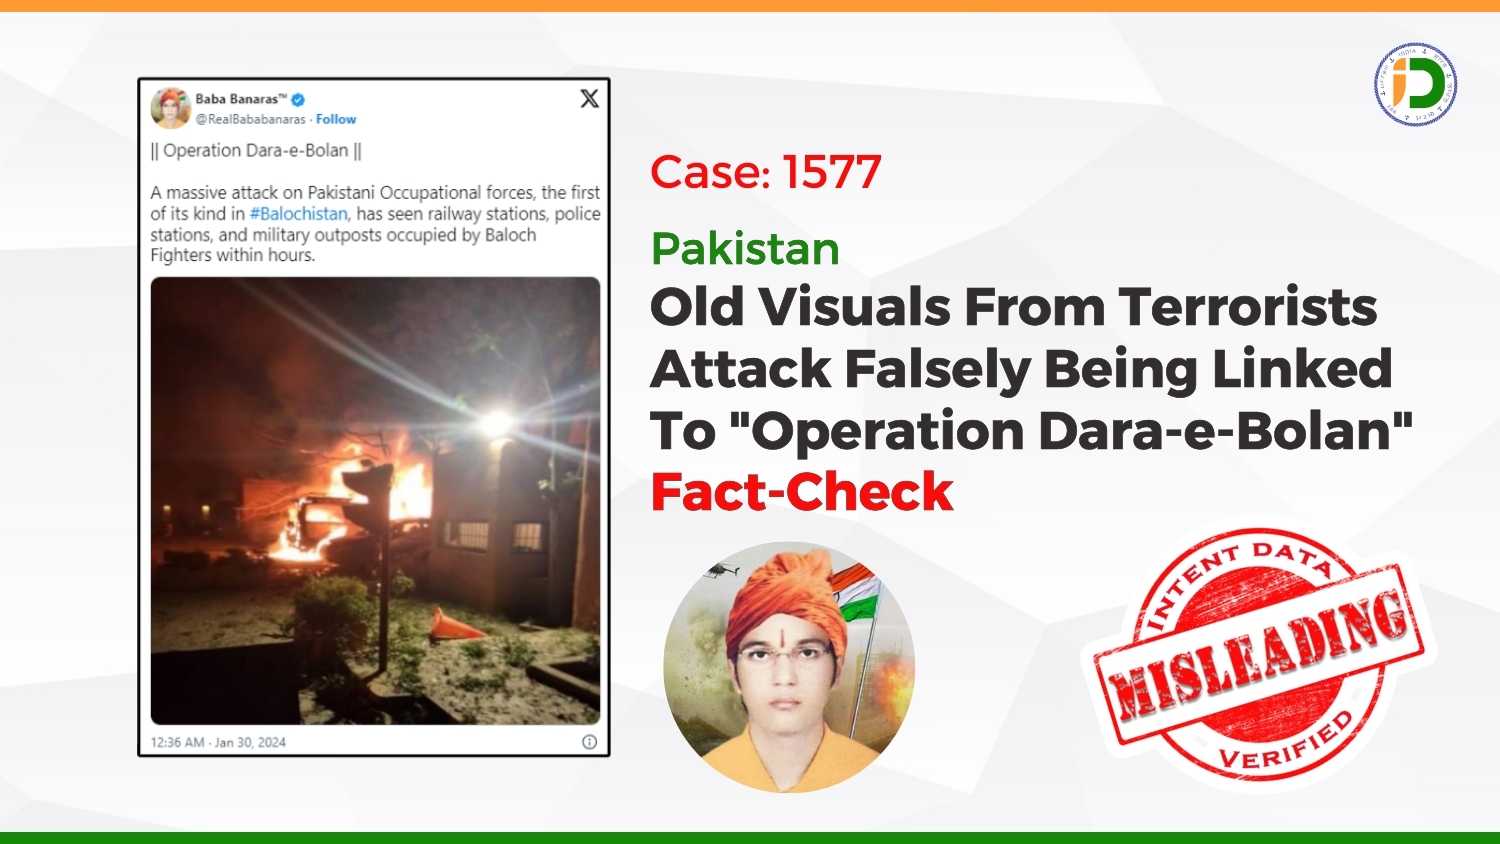 Pakistan — Old Visuals From Terrorists Attack Falsely Being Linked To “Operation Dara-e-Bolan”: Fact-Check